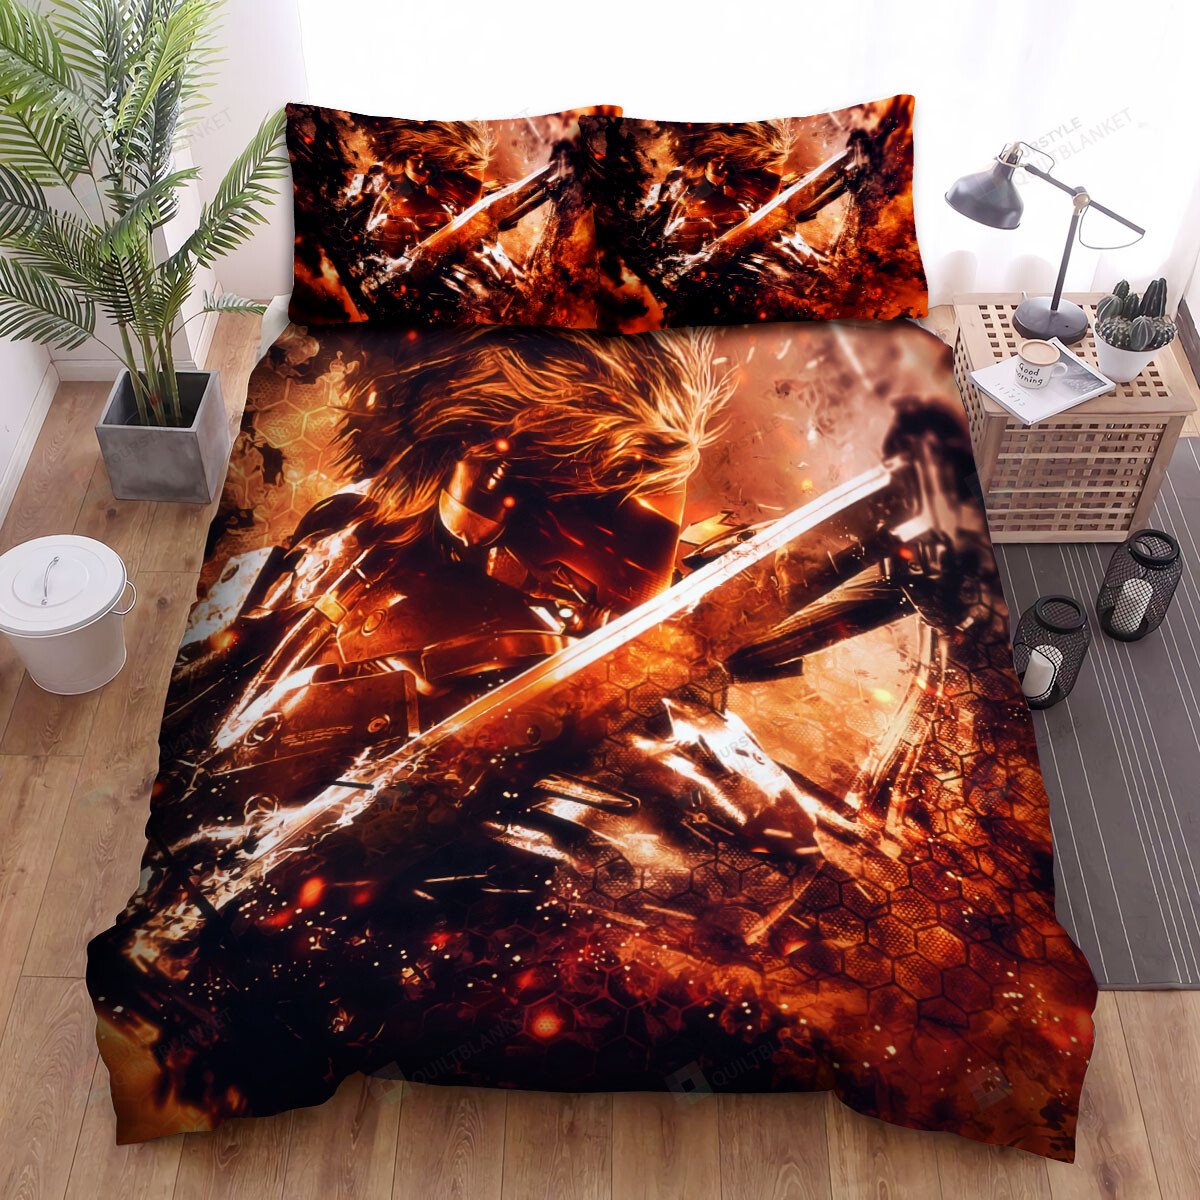 Metal Gear Solid The Flame Raiden Bed Sheets Spread Duvet Cover Bedding Sets